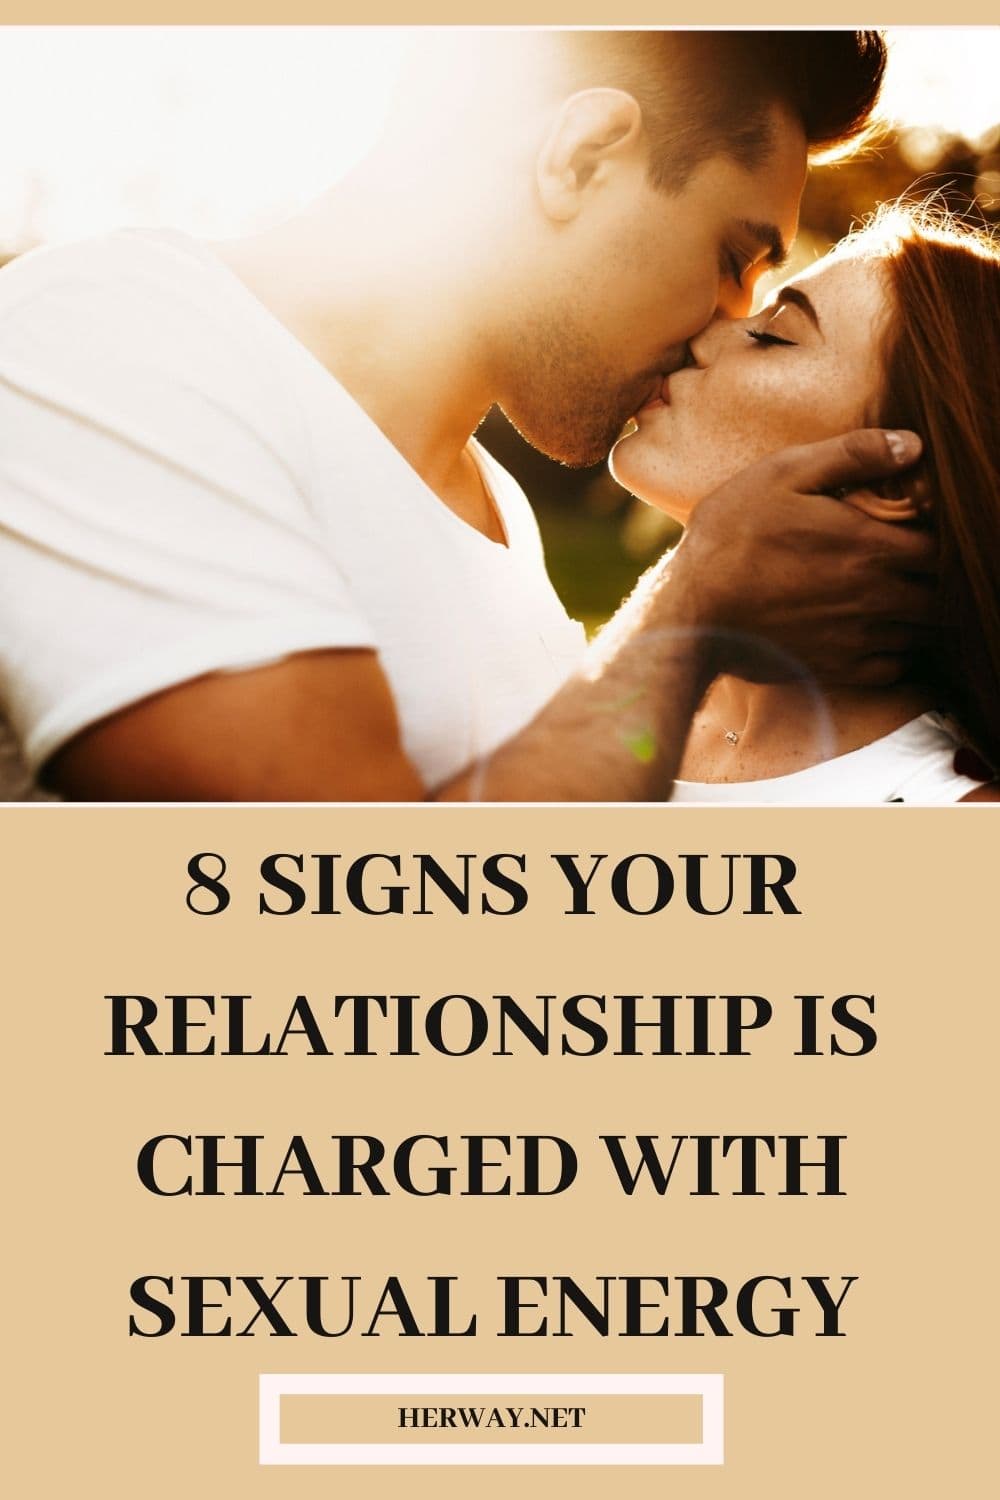 8 Signs Your Relationship Is Charged With Sexual Energy